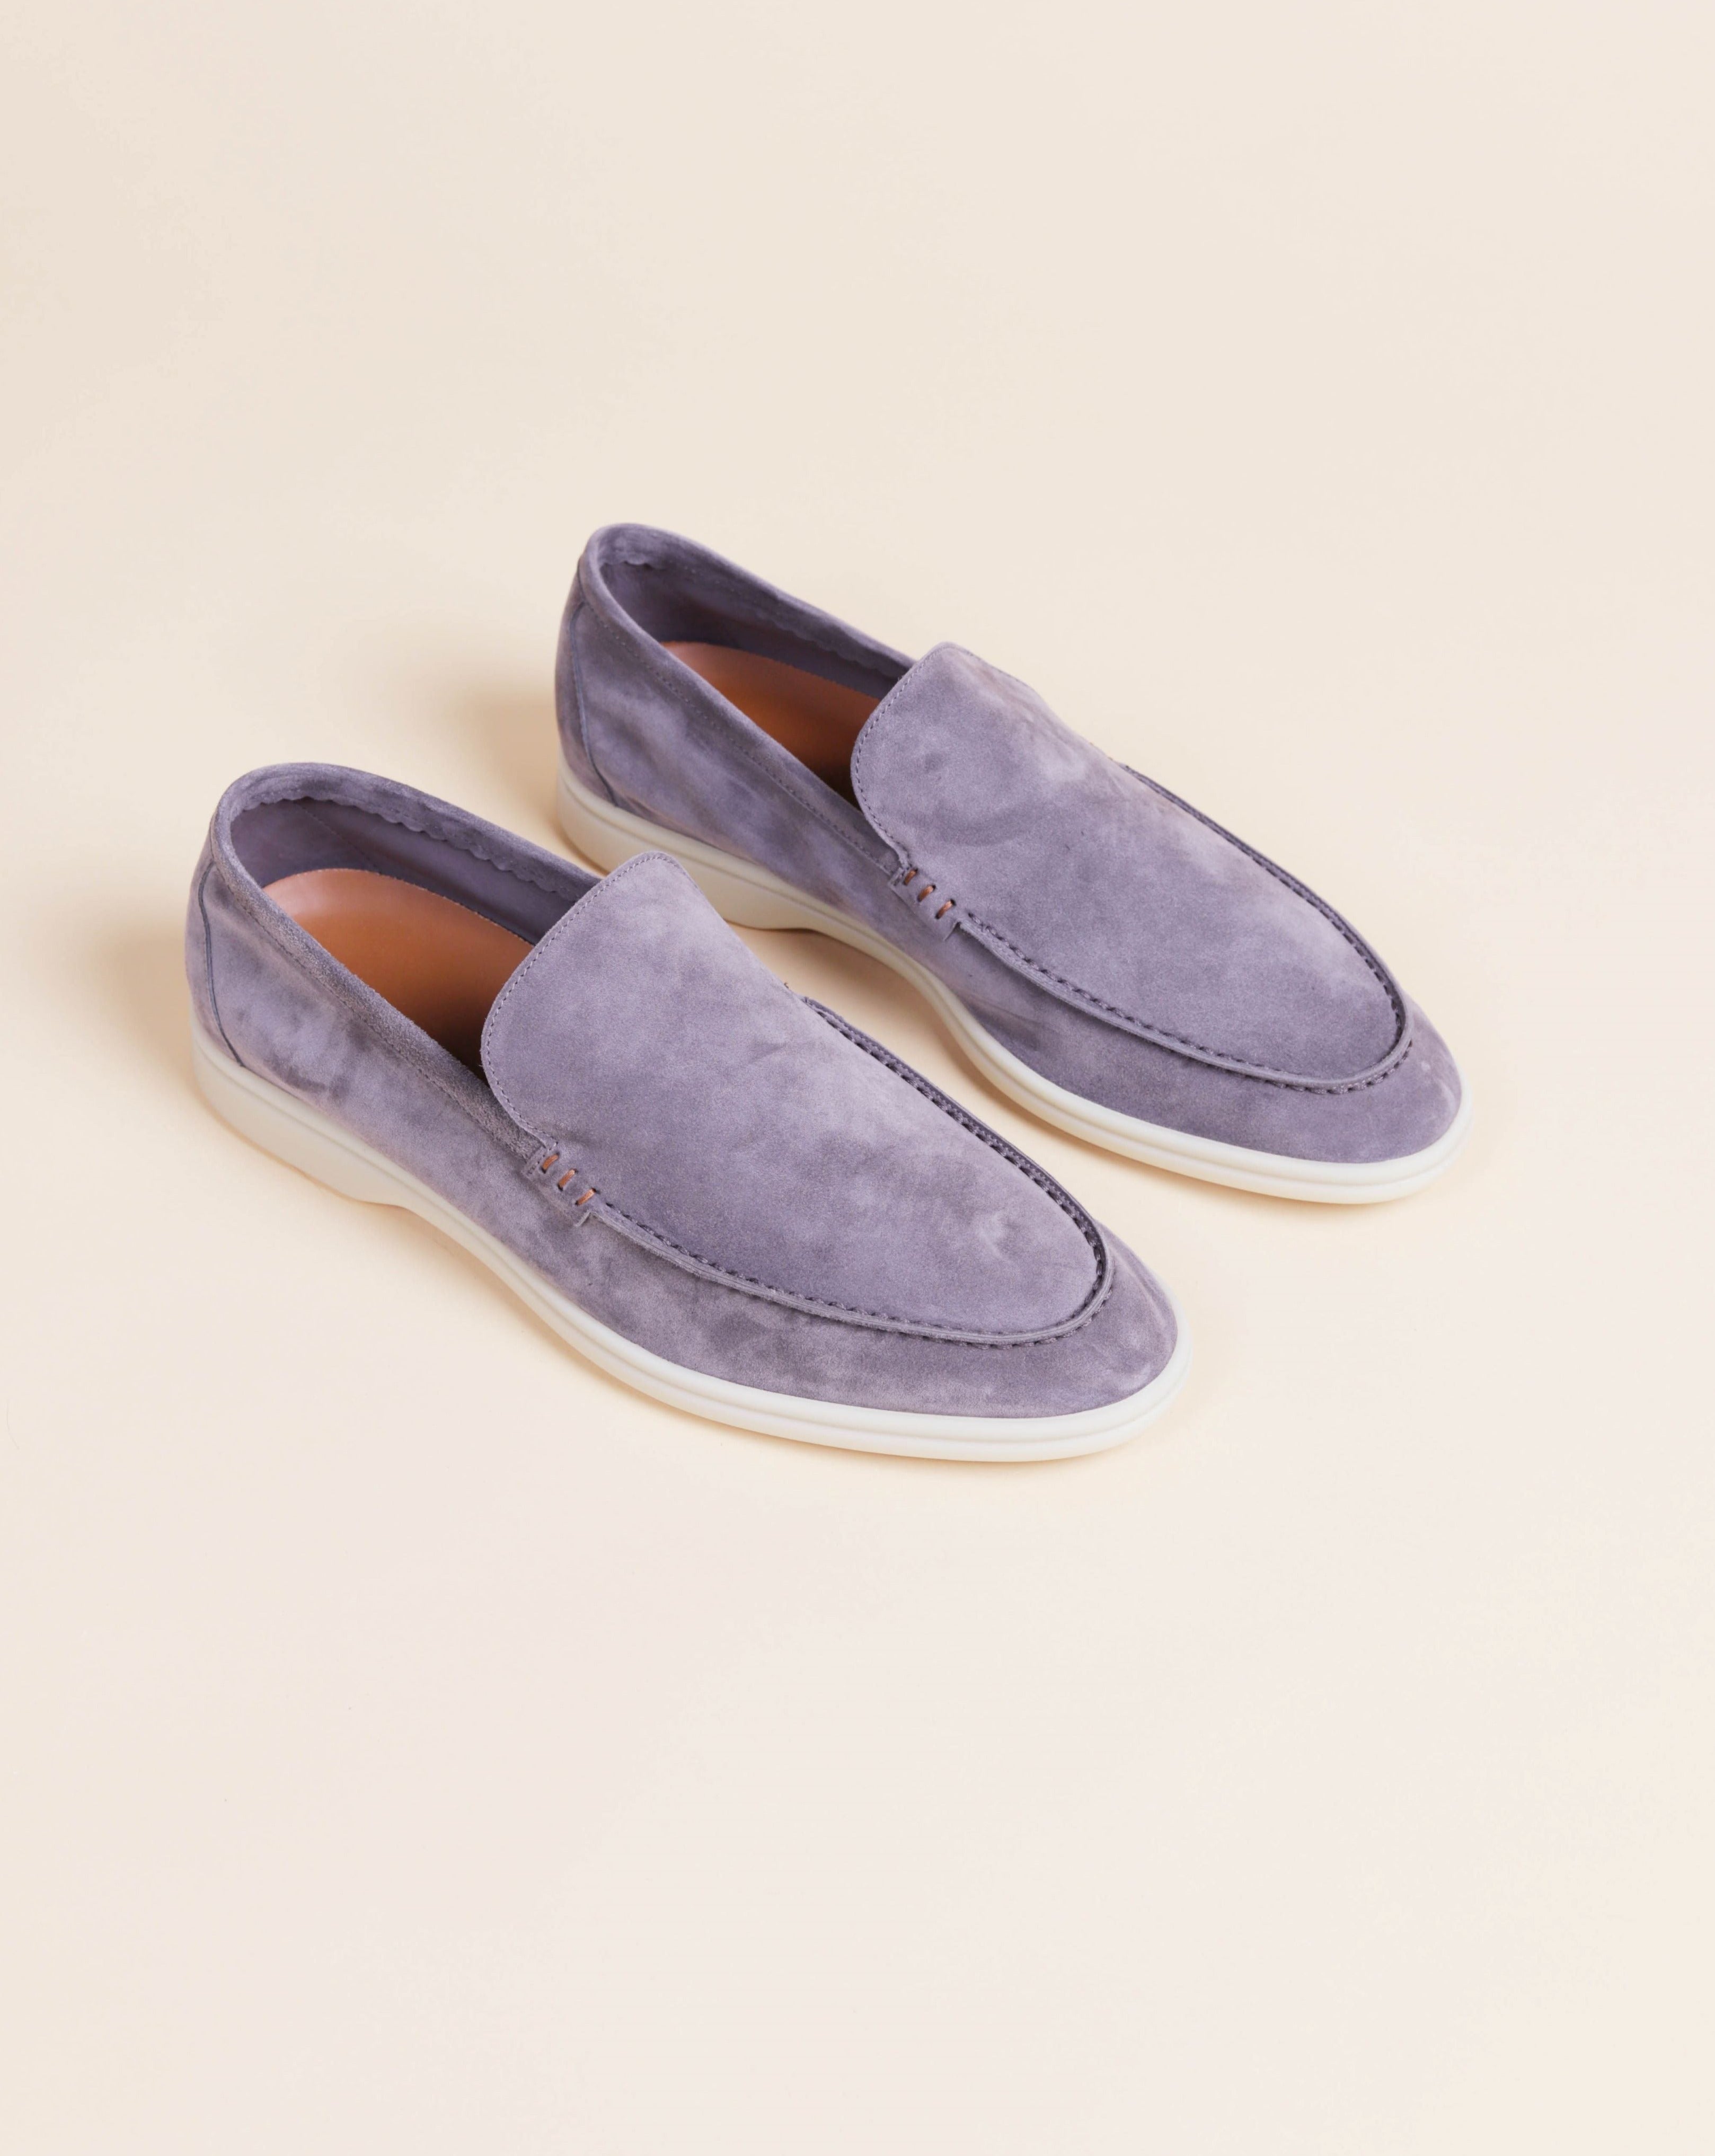 PS LOAFER SUEDE GREY